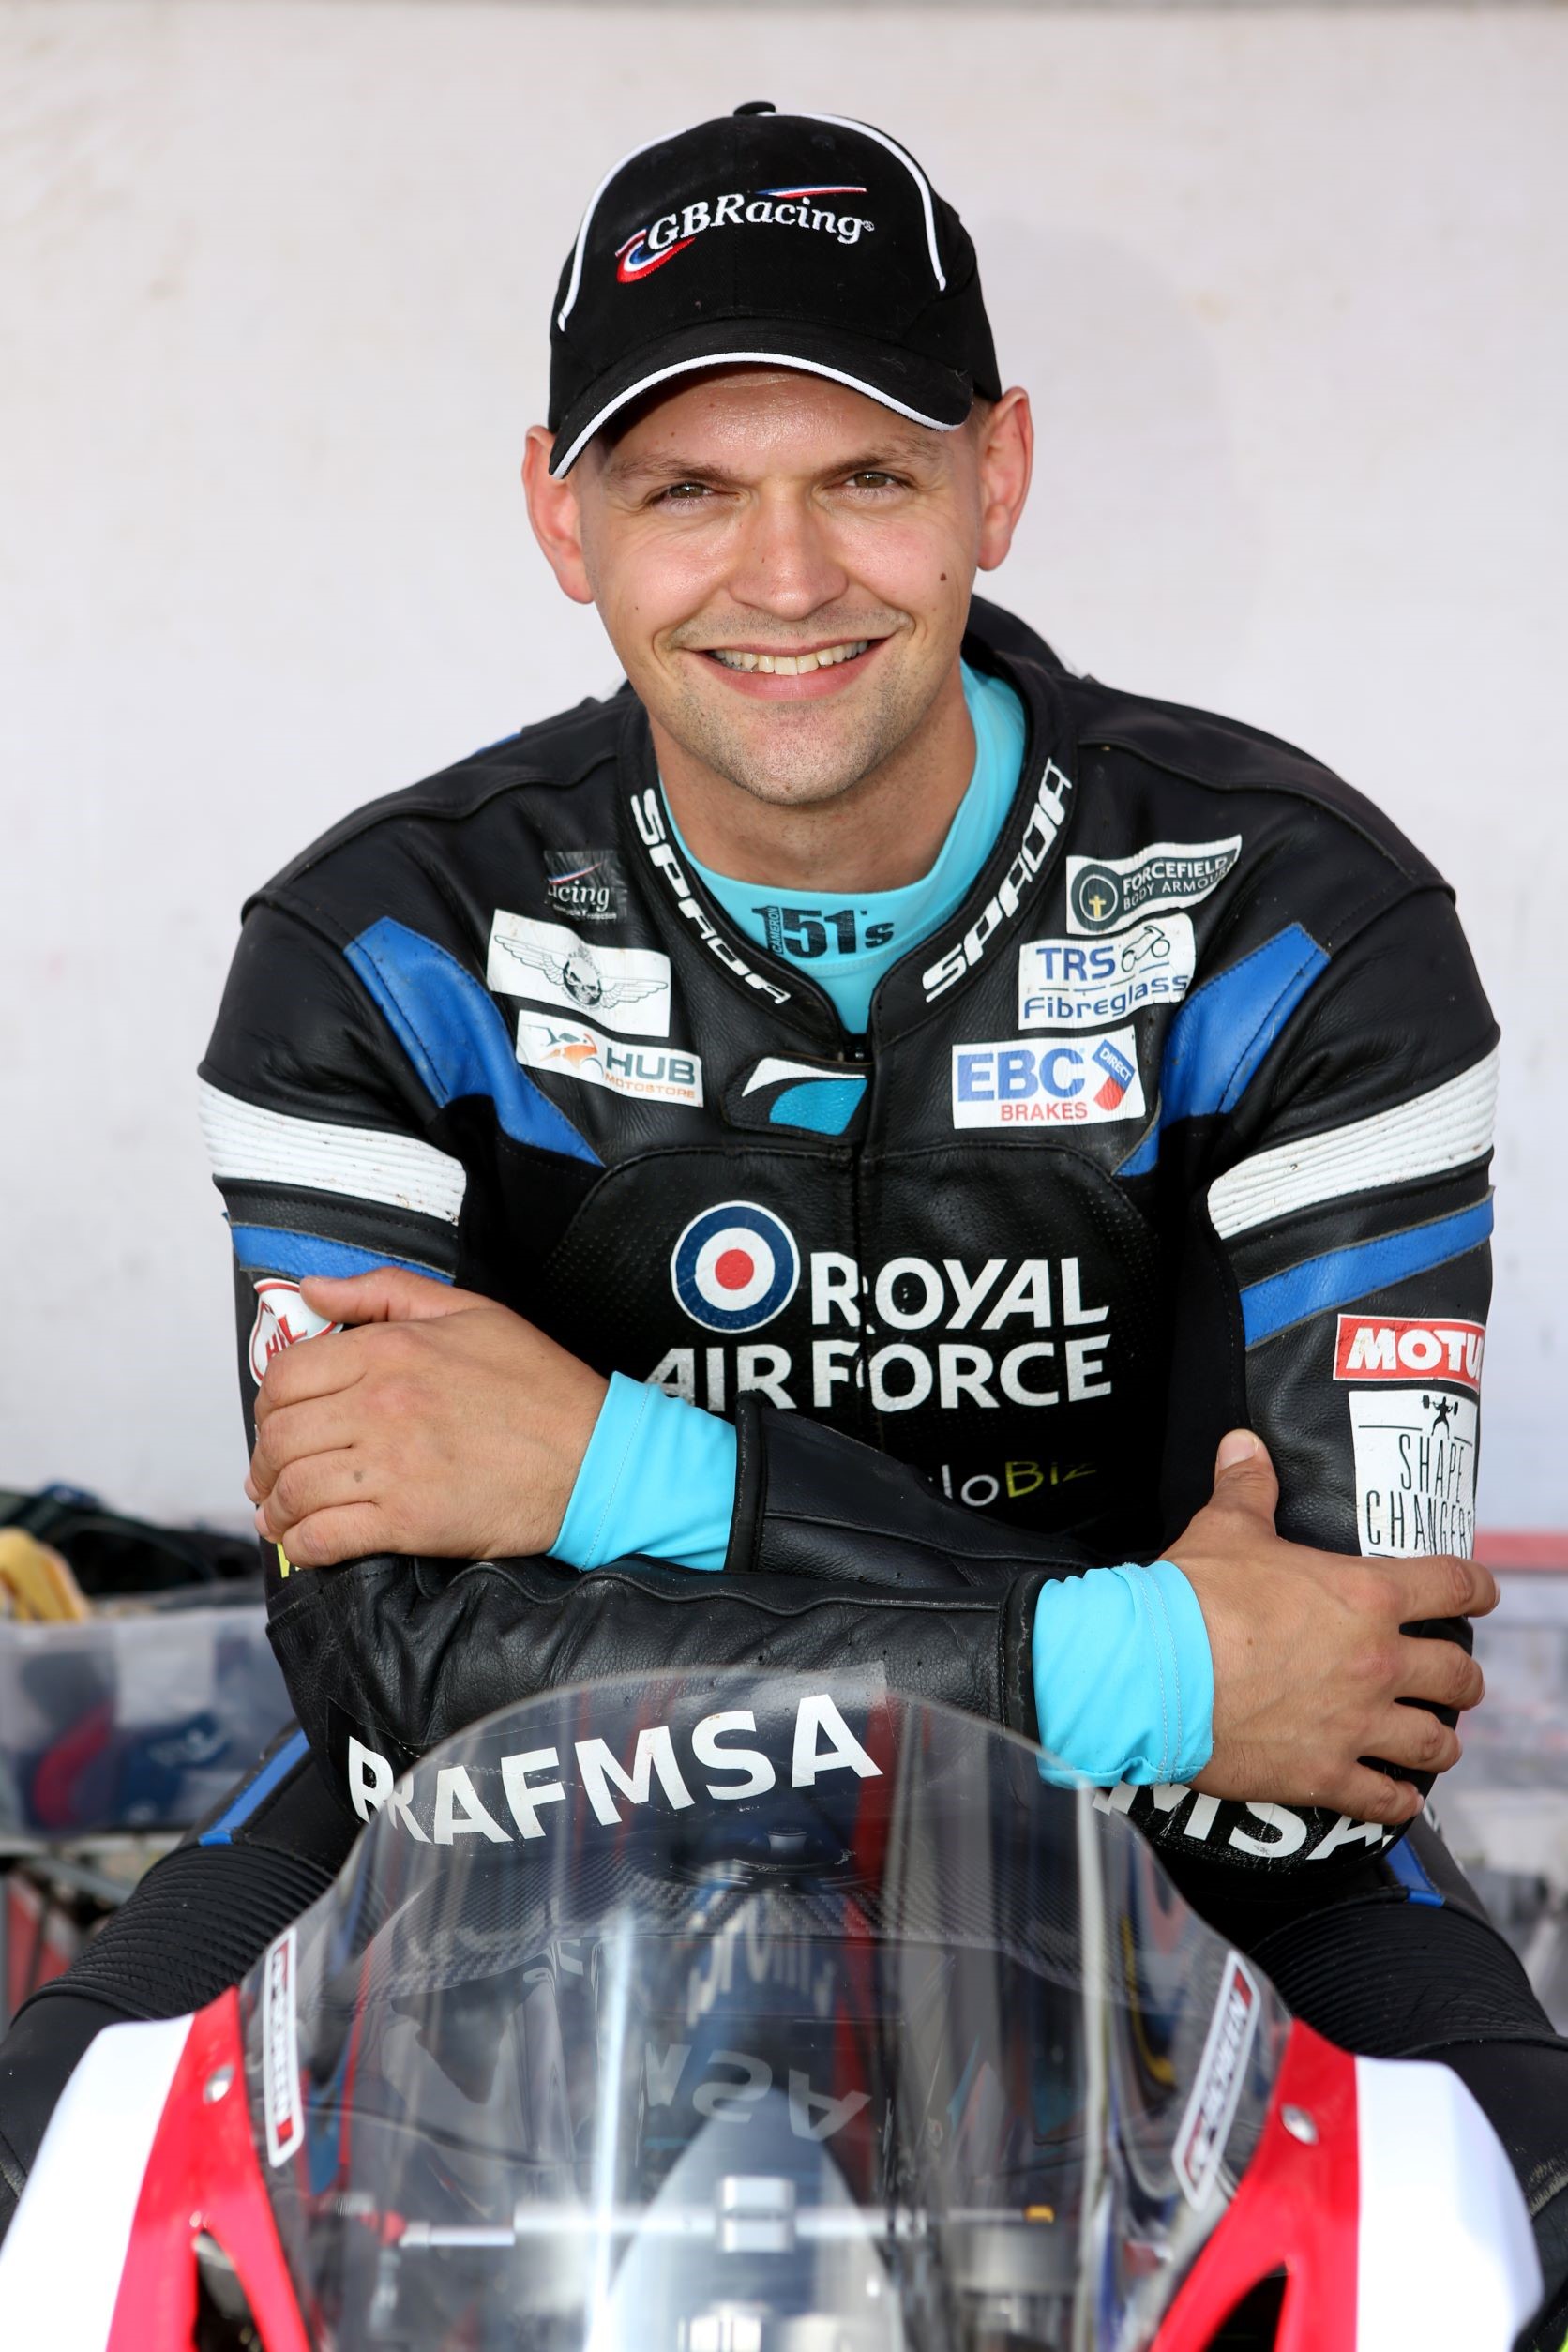 Image shows an RAF aviator in Motorbike gear while sitting on a motorcycle.